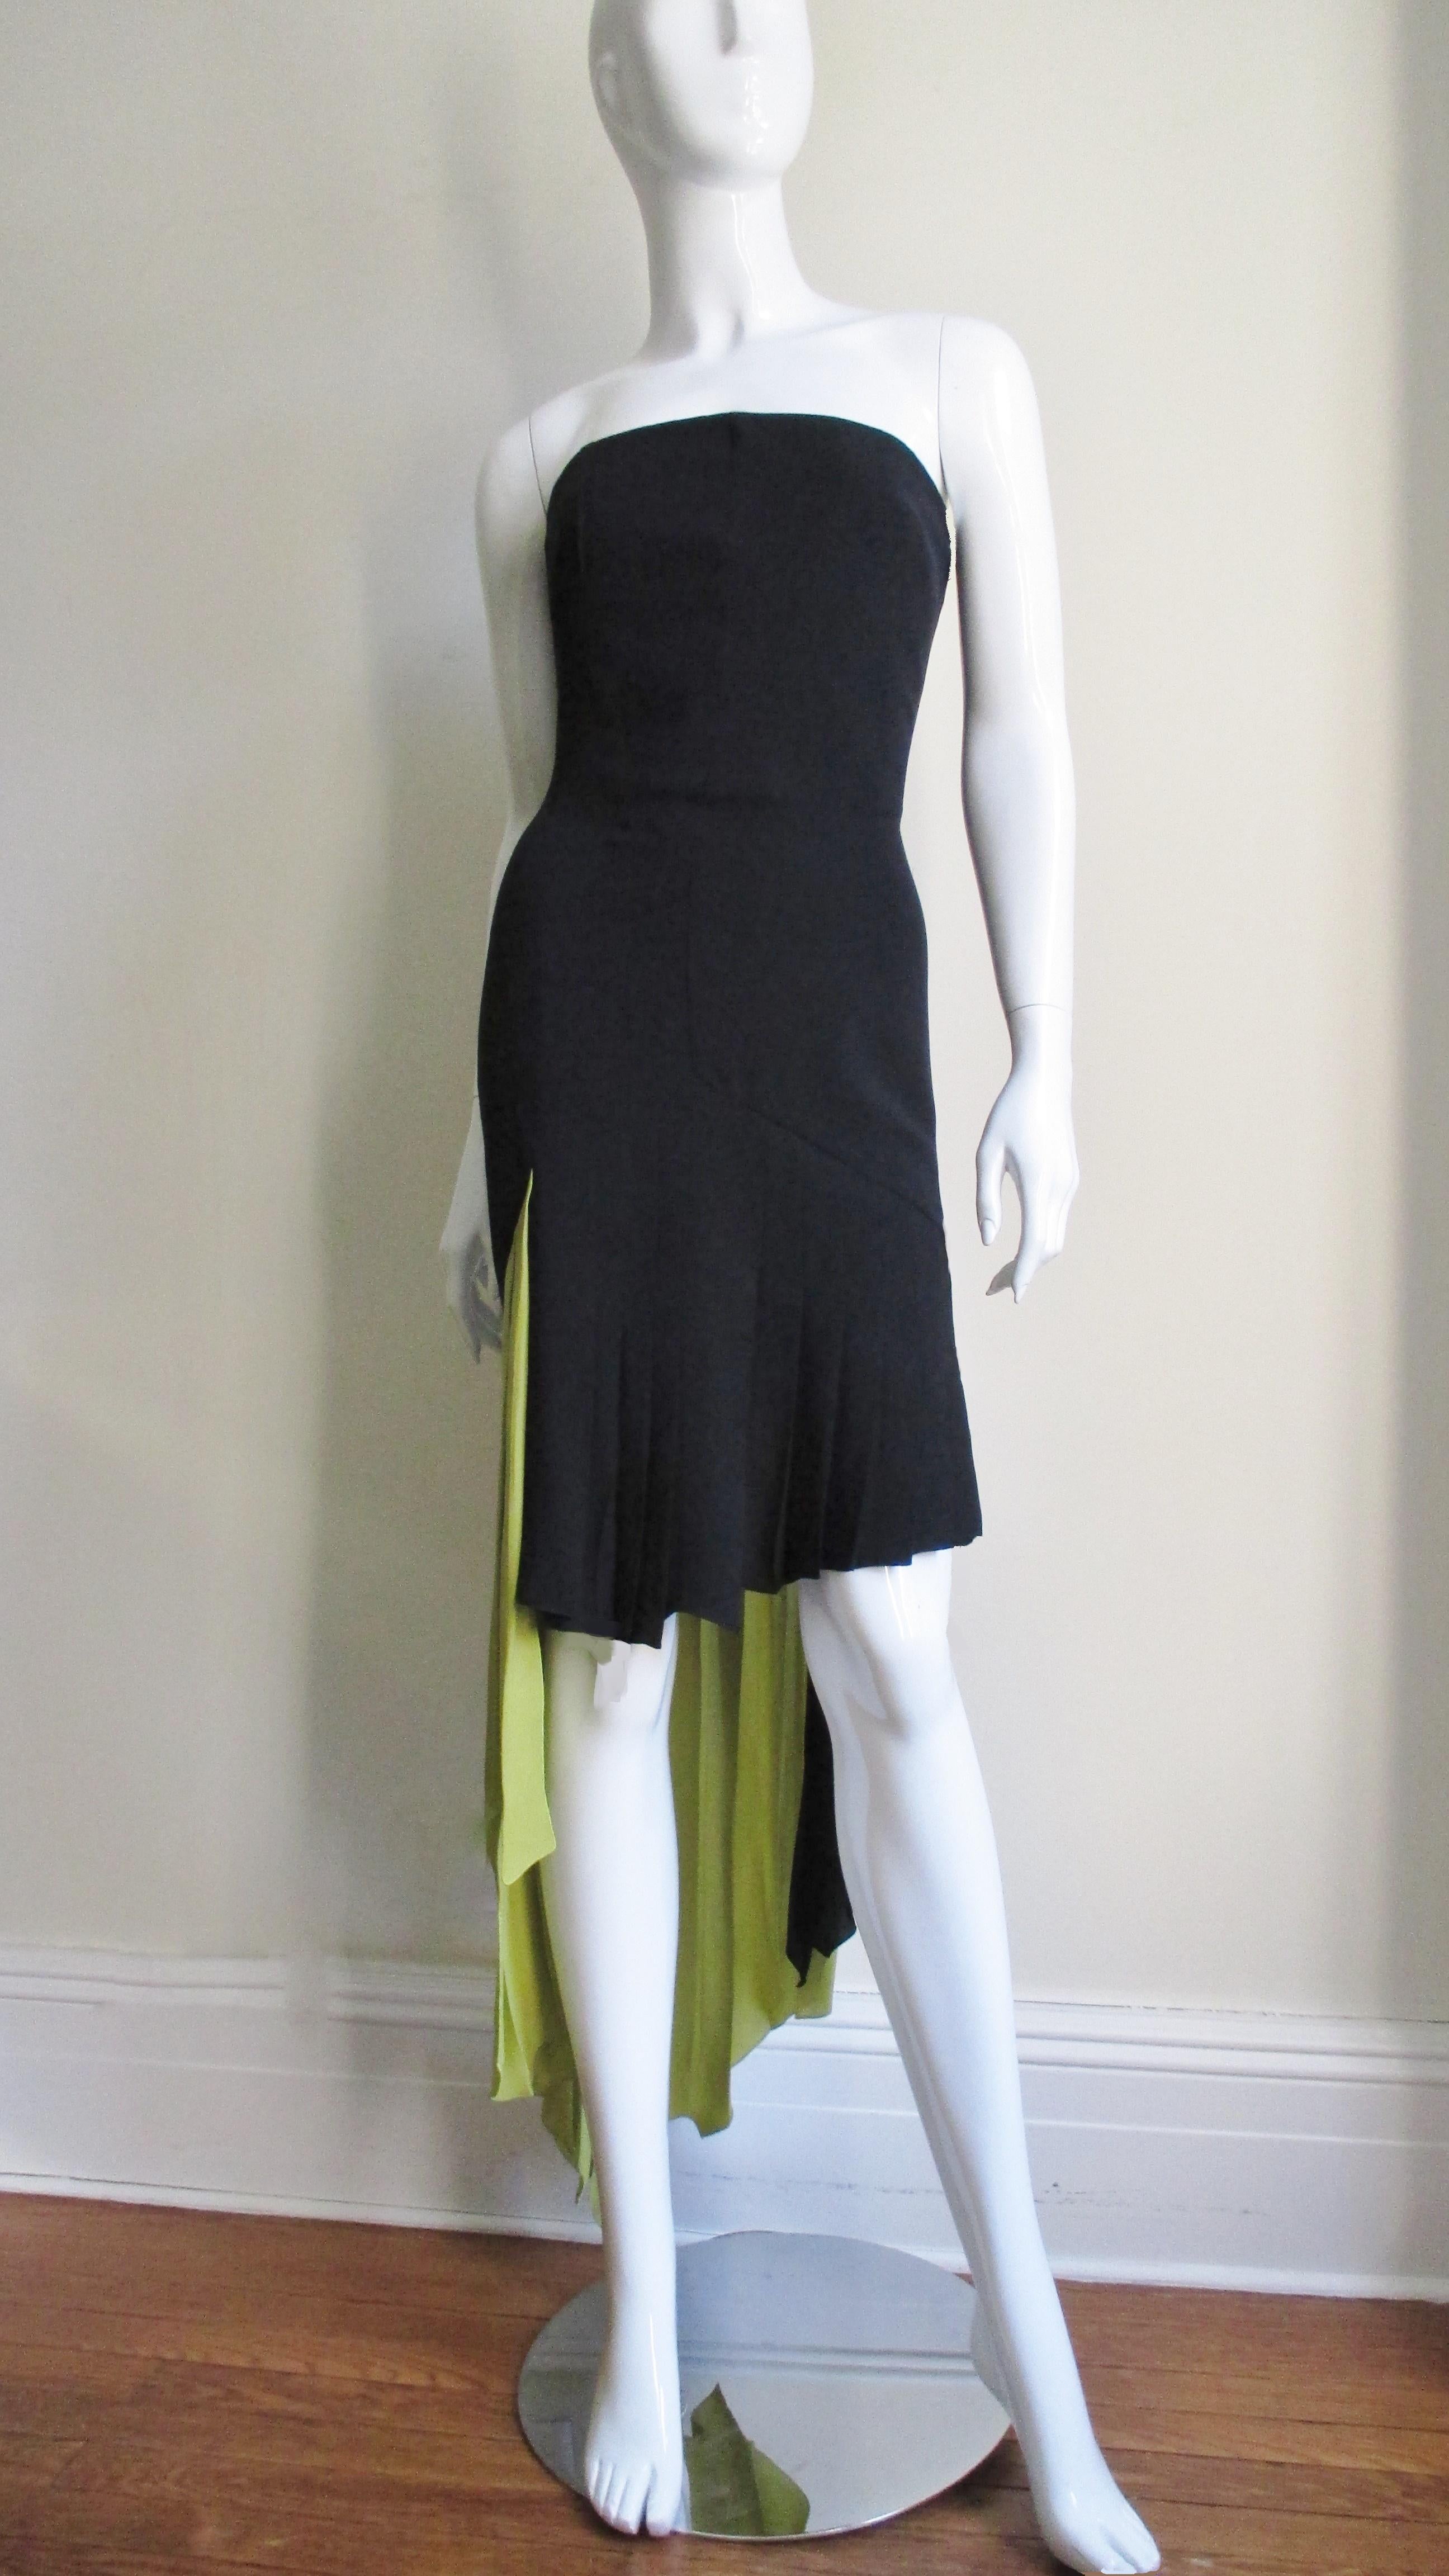 A fabulous silk bustier color block dress in black and lime green with a high low asymmetrical pleated hemline from Gianni Versace. The strapless dress has an inner boned corset for support. It is semi fitted through to the hips then falls in